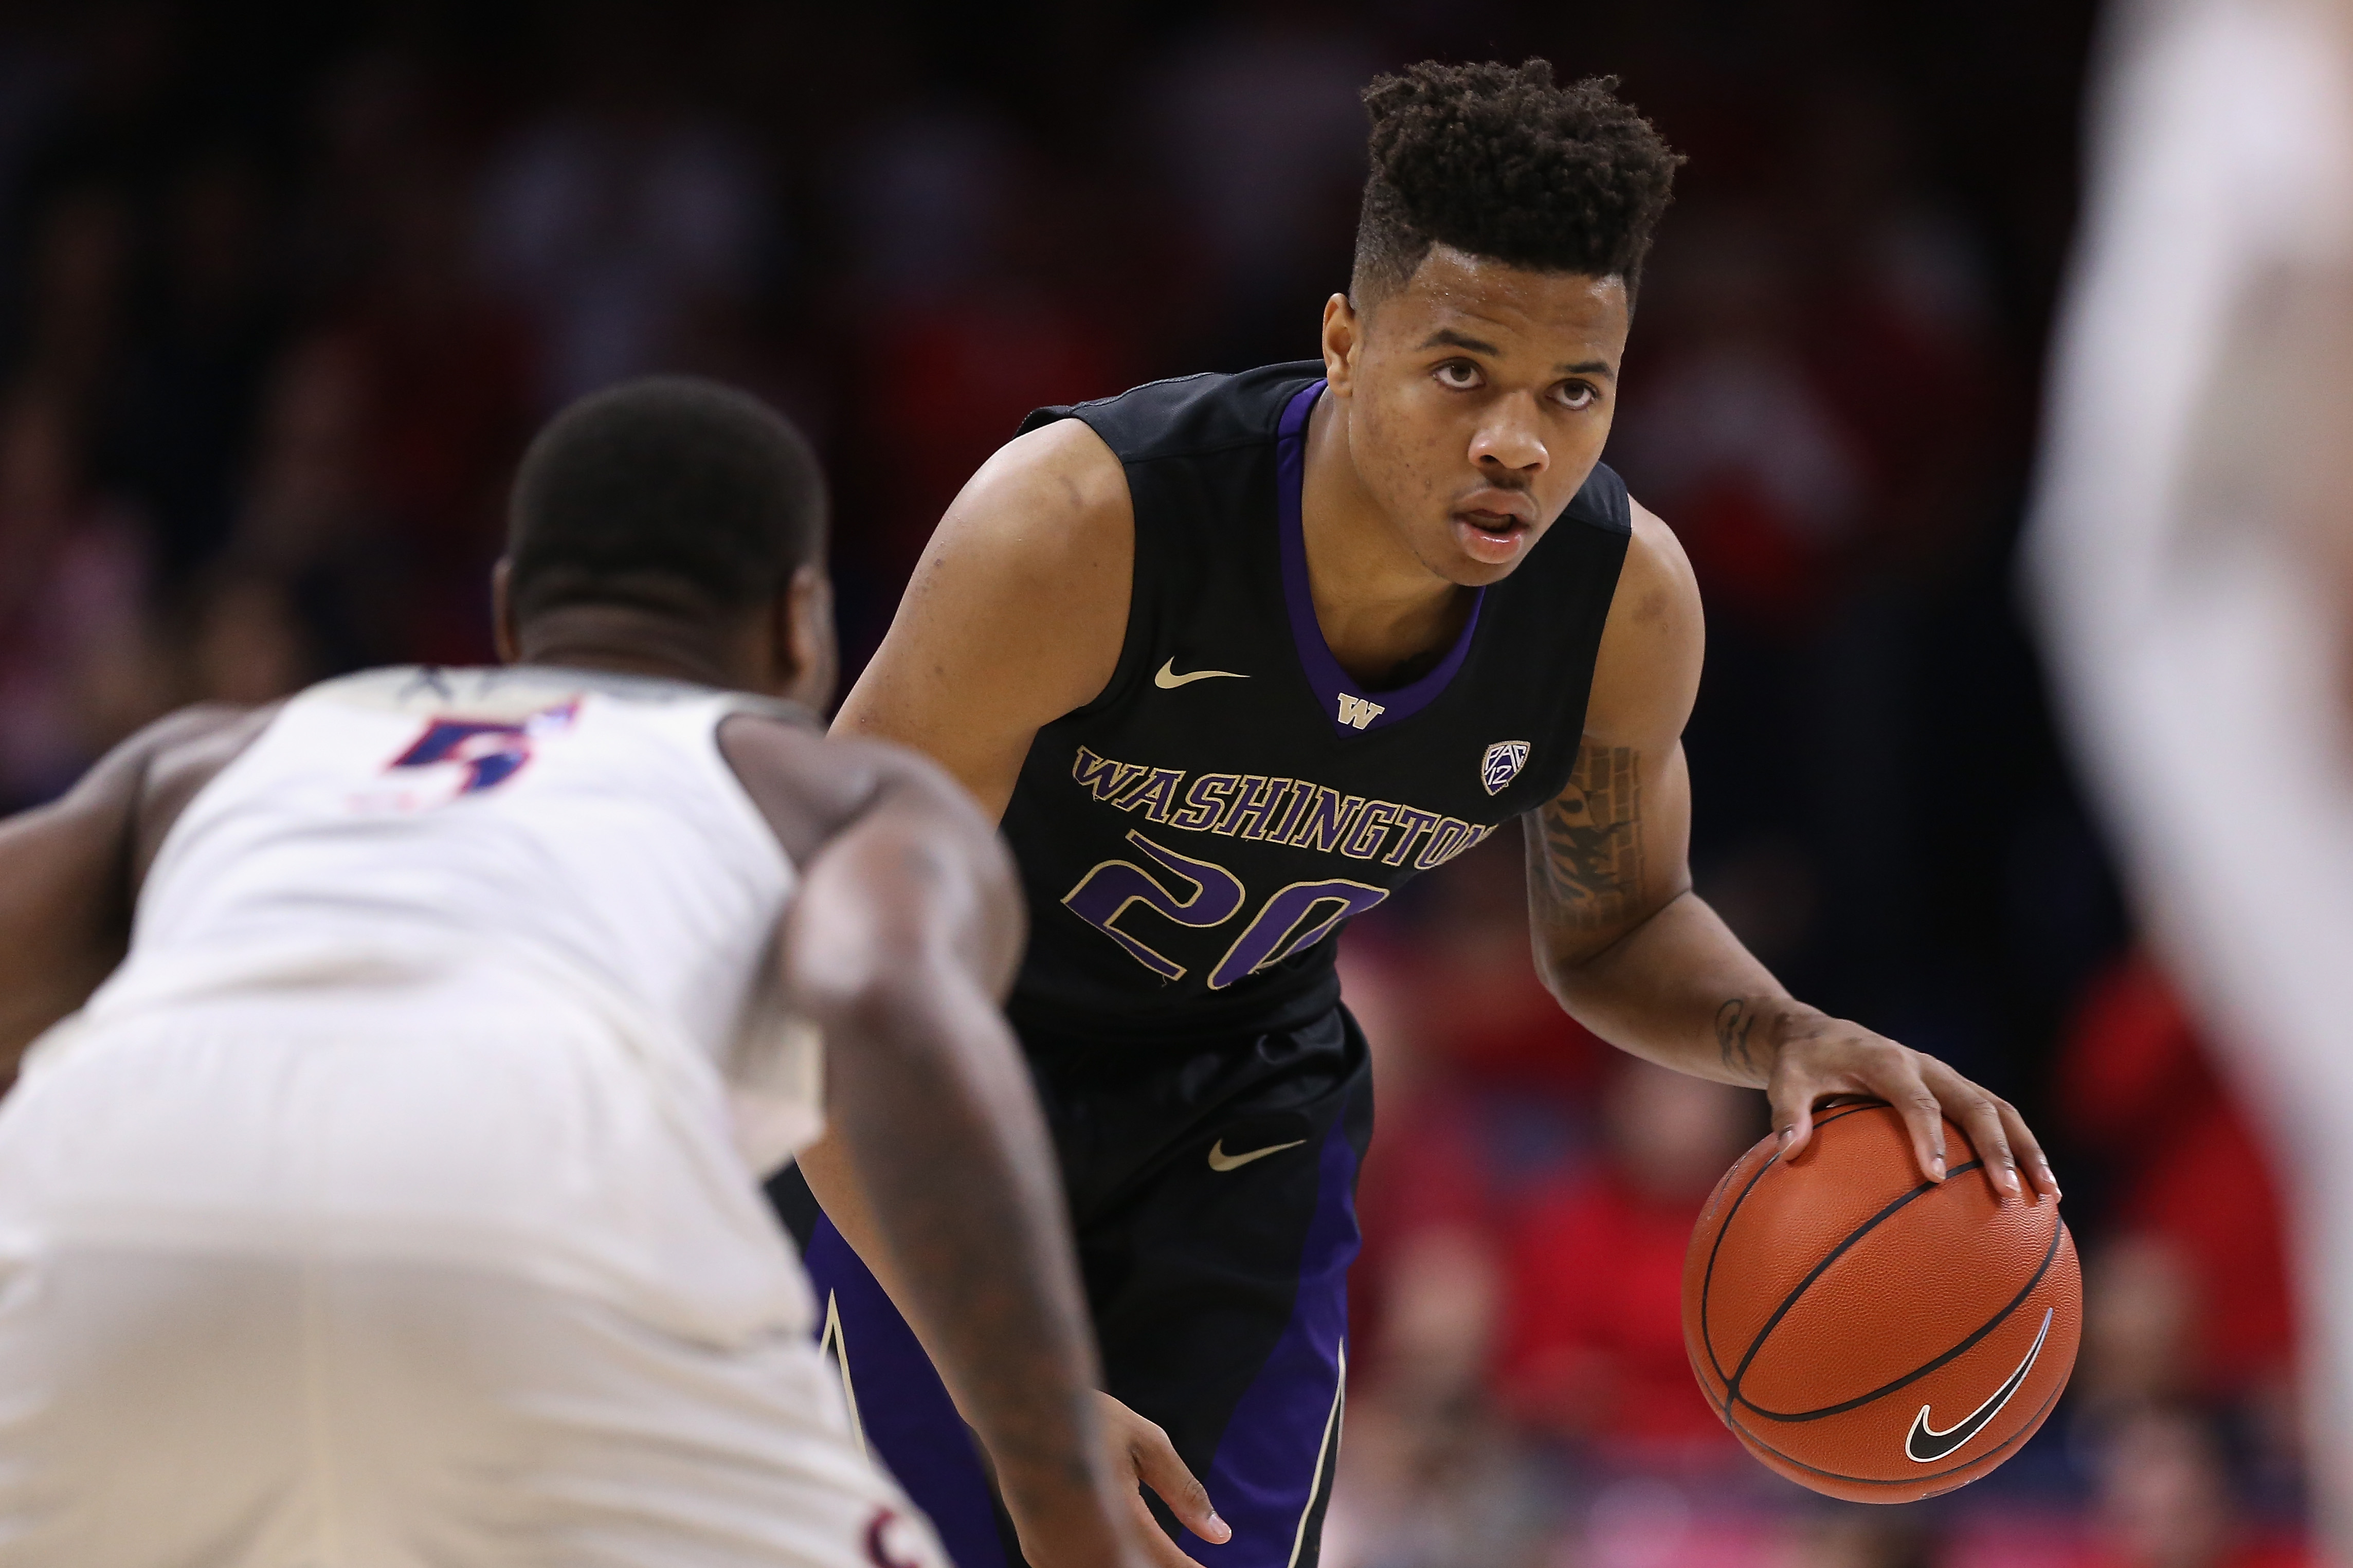 TUCSON, AZ - JANUARY 29:  Markelle Fultz #20 of the Washington Huskies handles the ball during the second half of the college basketball game against the Arizona Wildcats at McKale Center on January 29, 2017 in Tucson, Arizona. The Wildcats defeated the Huskies 77-66.  (Photo by Christian Petersen/Getty Images)